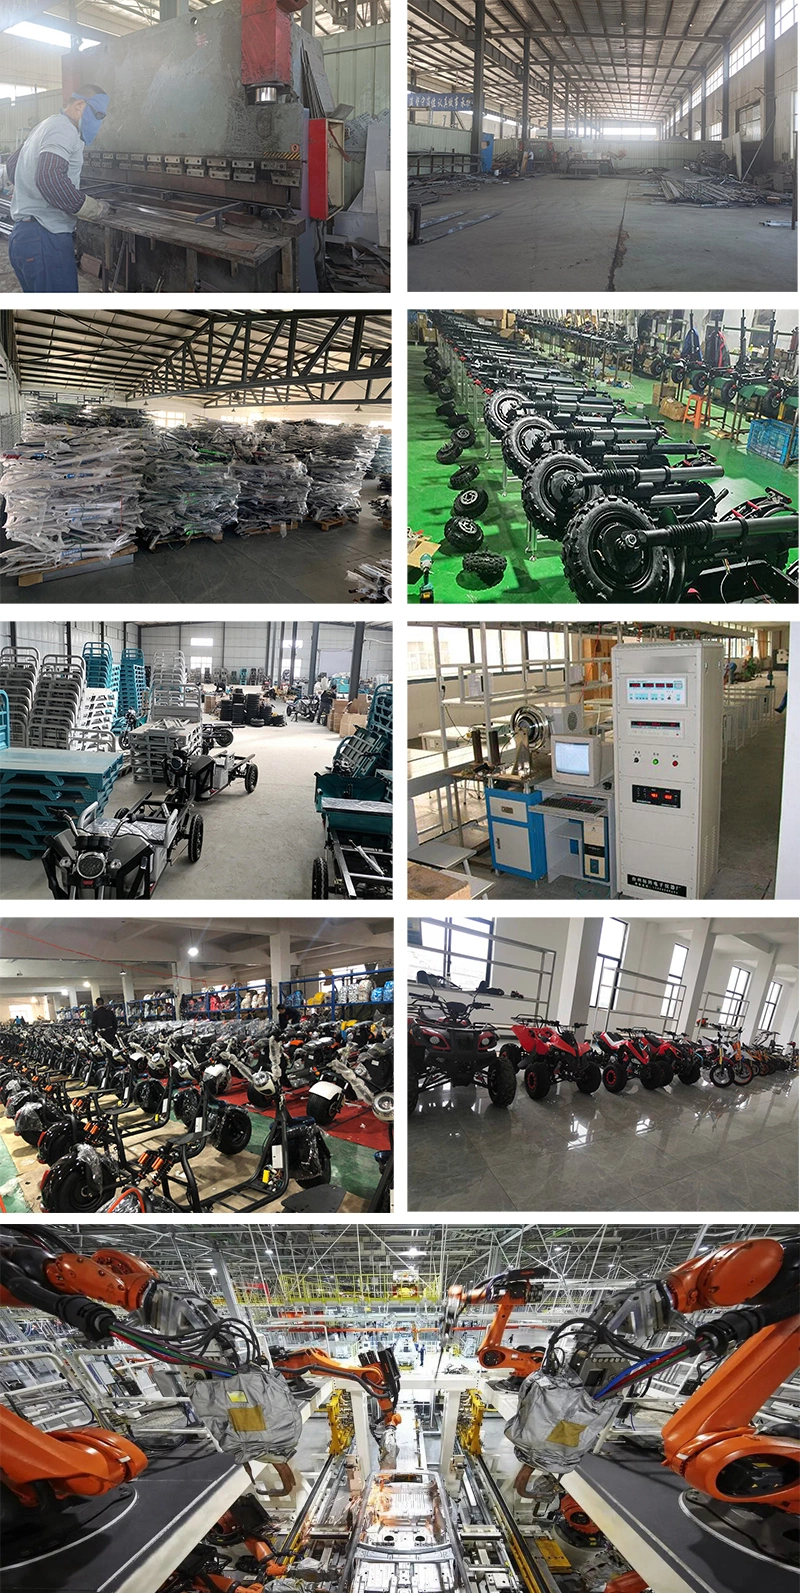 Electric for Food Wheel Motor Three Bike Kids 3 Sale with Adult Passenger Kit Children Tricycles Customer Comfortable Tricycle